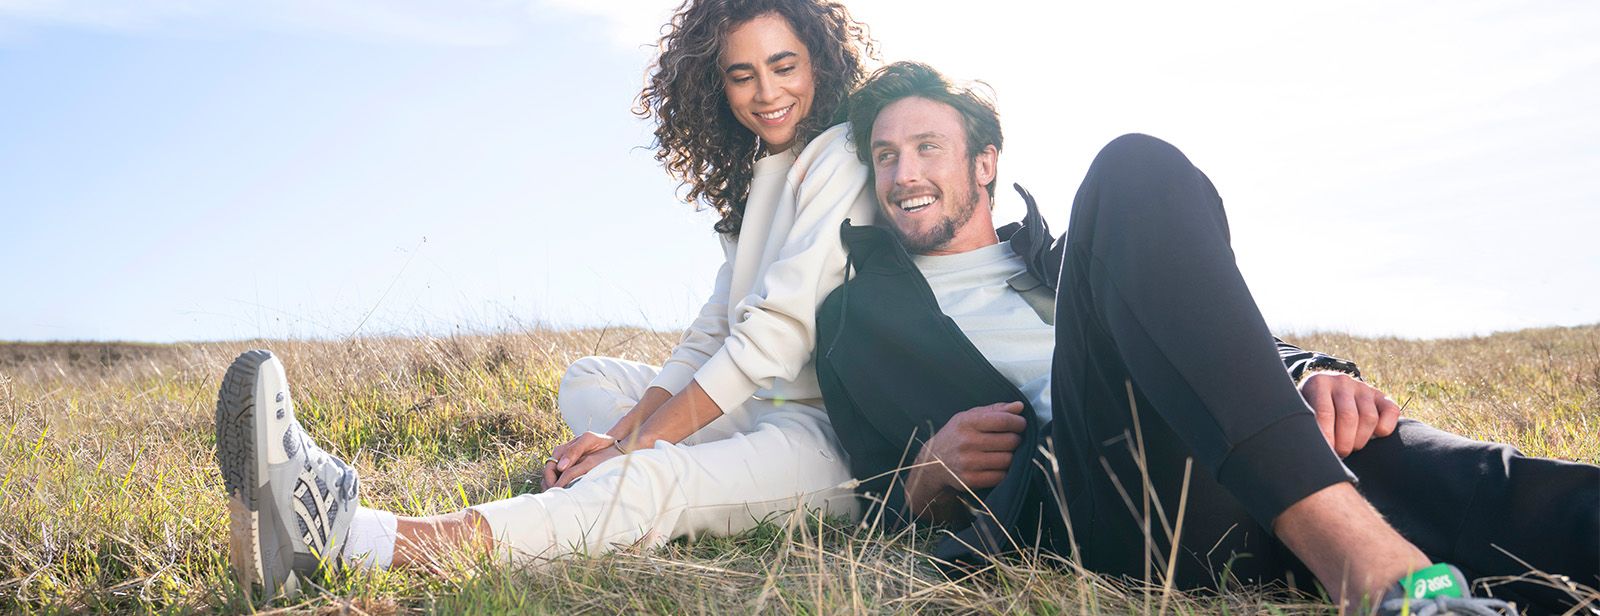 Man and woman in sustainable ASICS gear sitting in field.